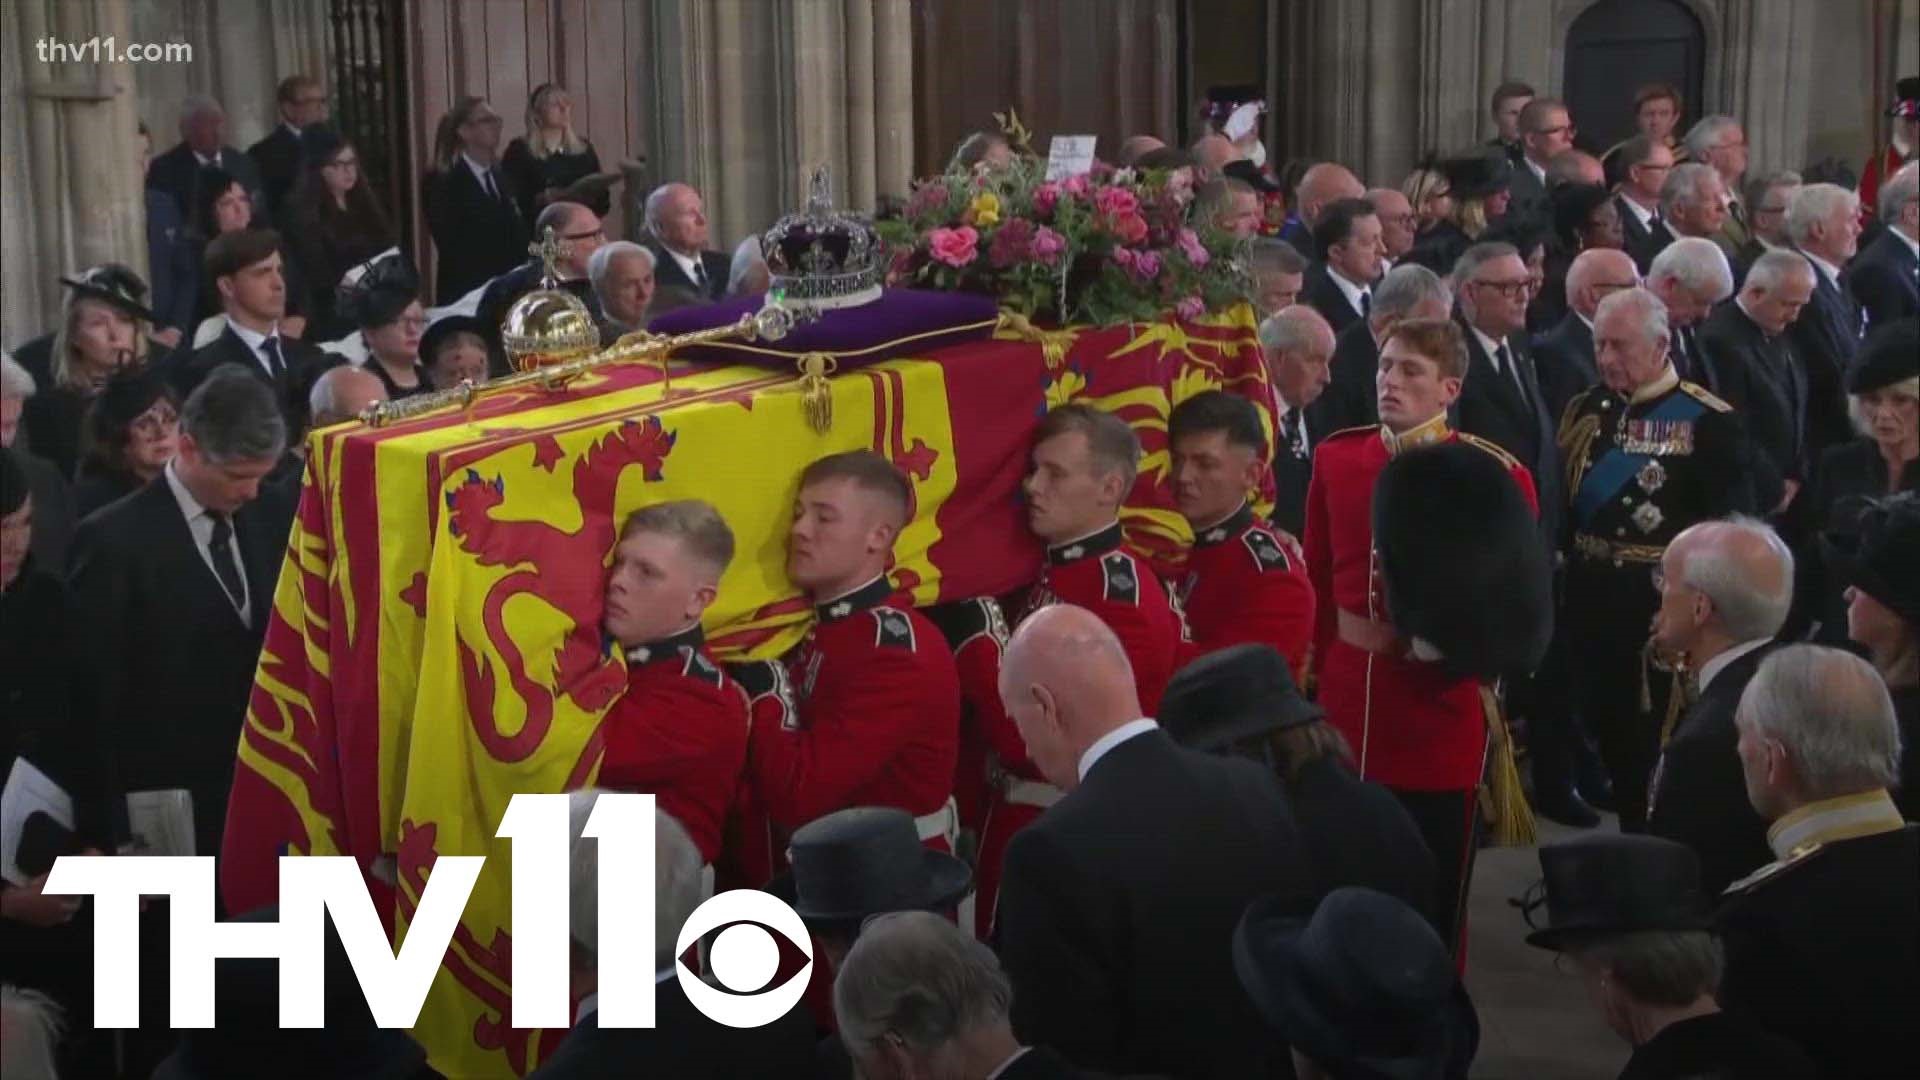 Thousands attended the state funeral at Westminster Abbey for Queen Elizabeth the Second, where they mourned the loss but also celebrated her 70-year reign.